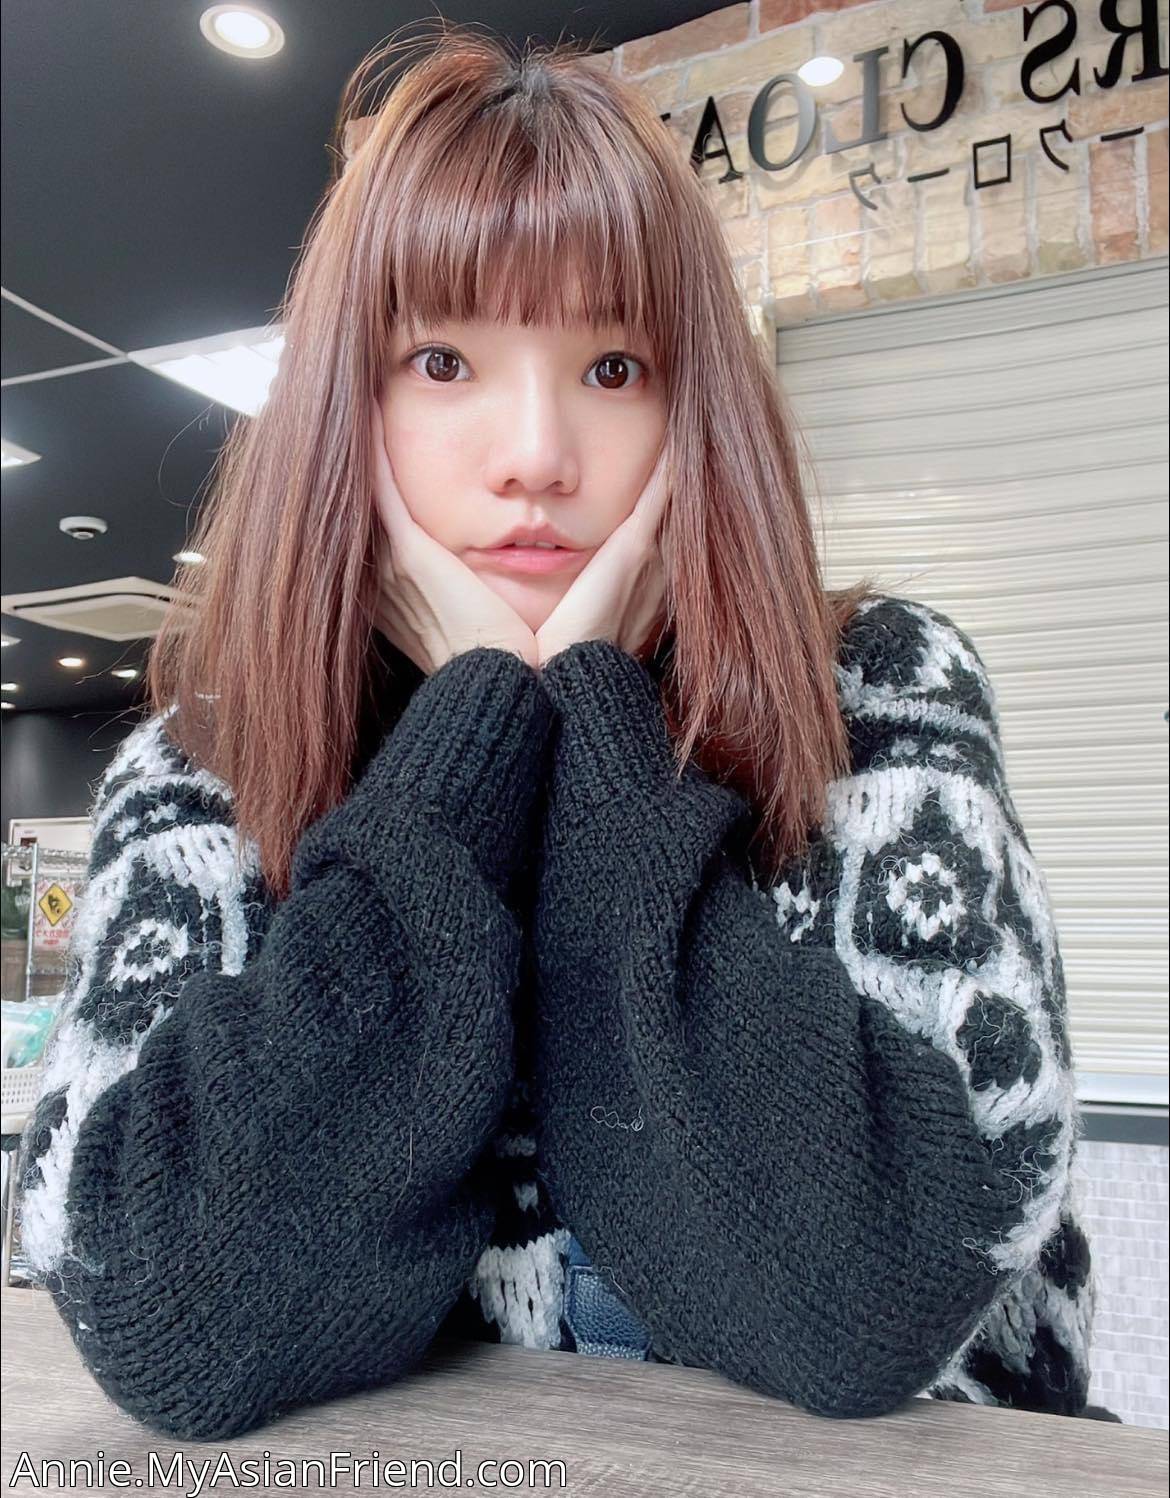 Annie's personal blog photo 1 added Tuesday the 8th of November 2022